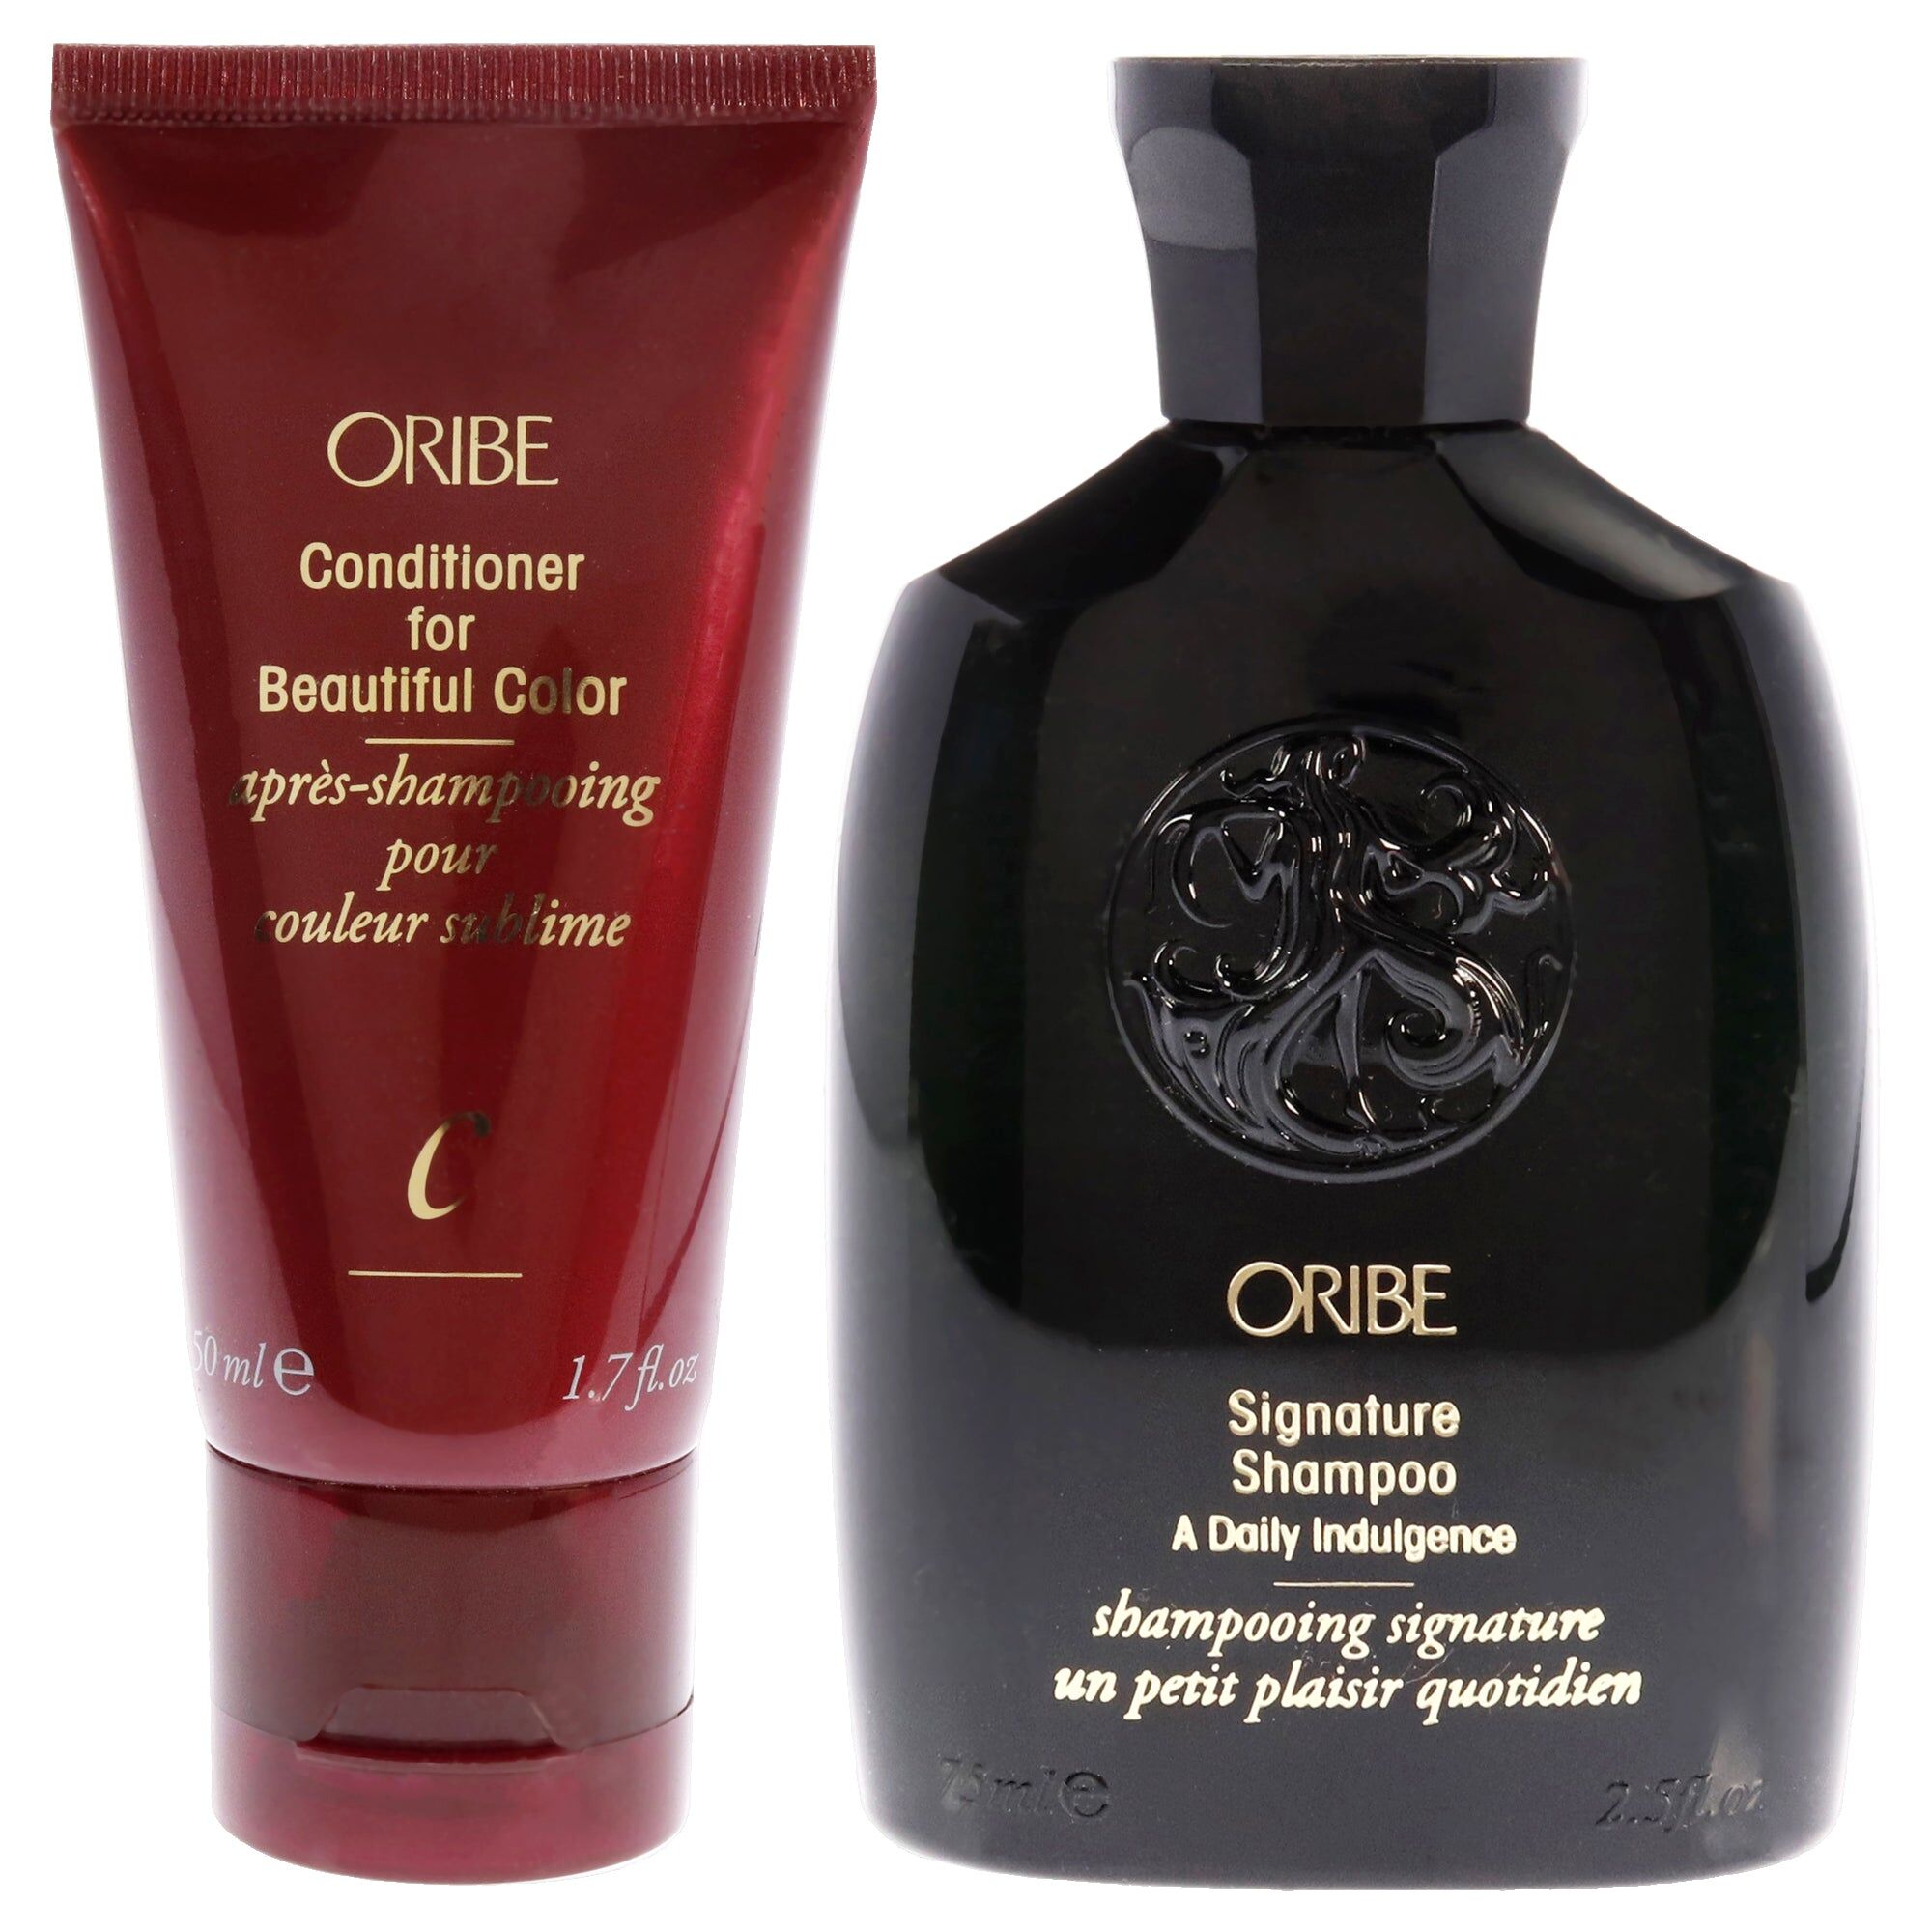 Conditioner for Beautiful Color and Signature Shampoo Kit by Oribe for Unisex - 2 Pc Kit 1.7oz Conditioner, 2.5oz Shampoo One Size unisex